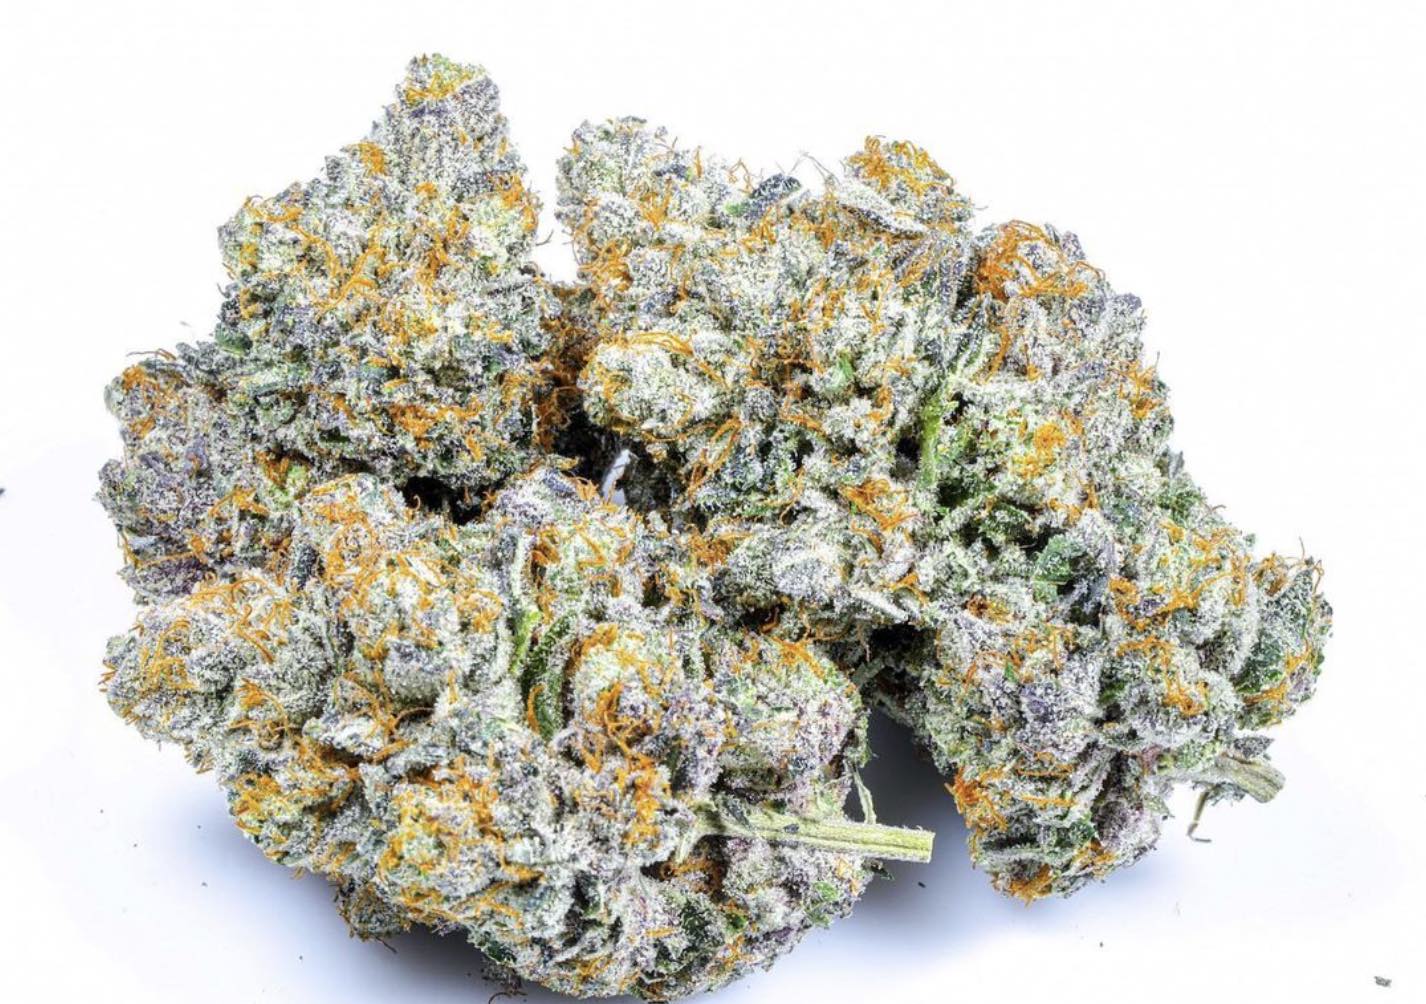 Area 41 Strain by Alien Labs: An Otherworldly Hybrid That Reeks Of Lemons, Dough, and Gas